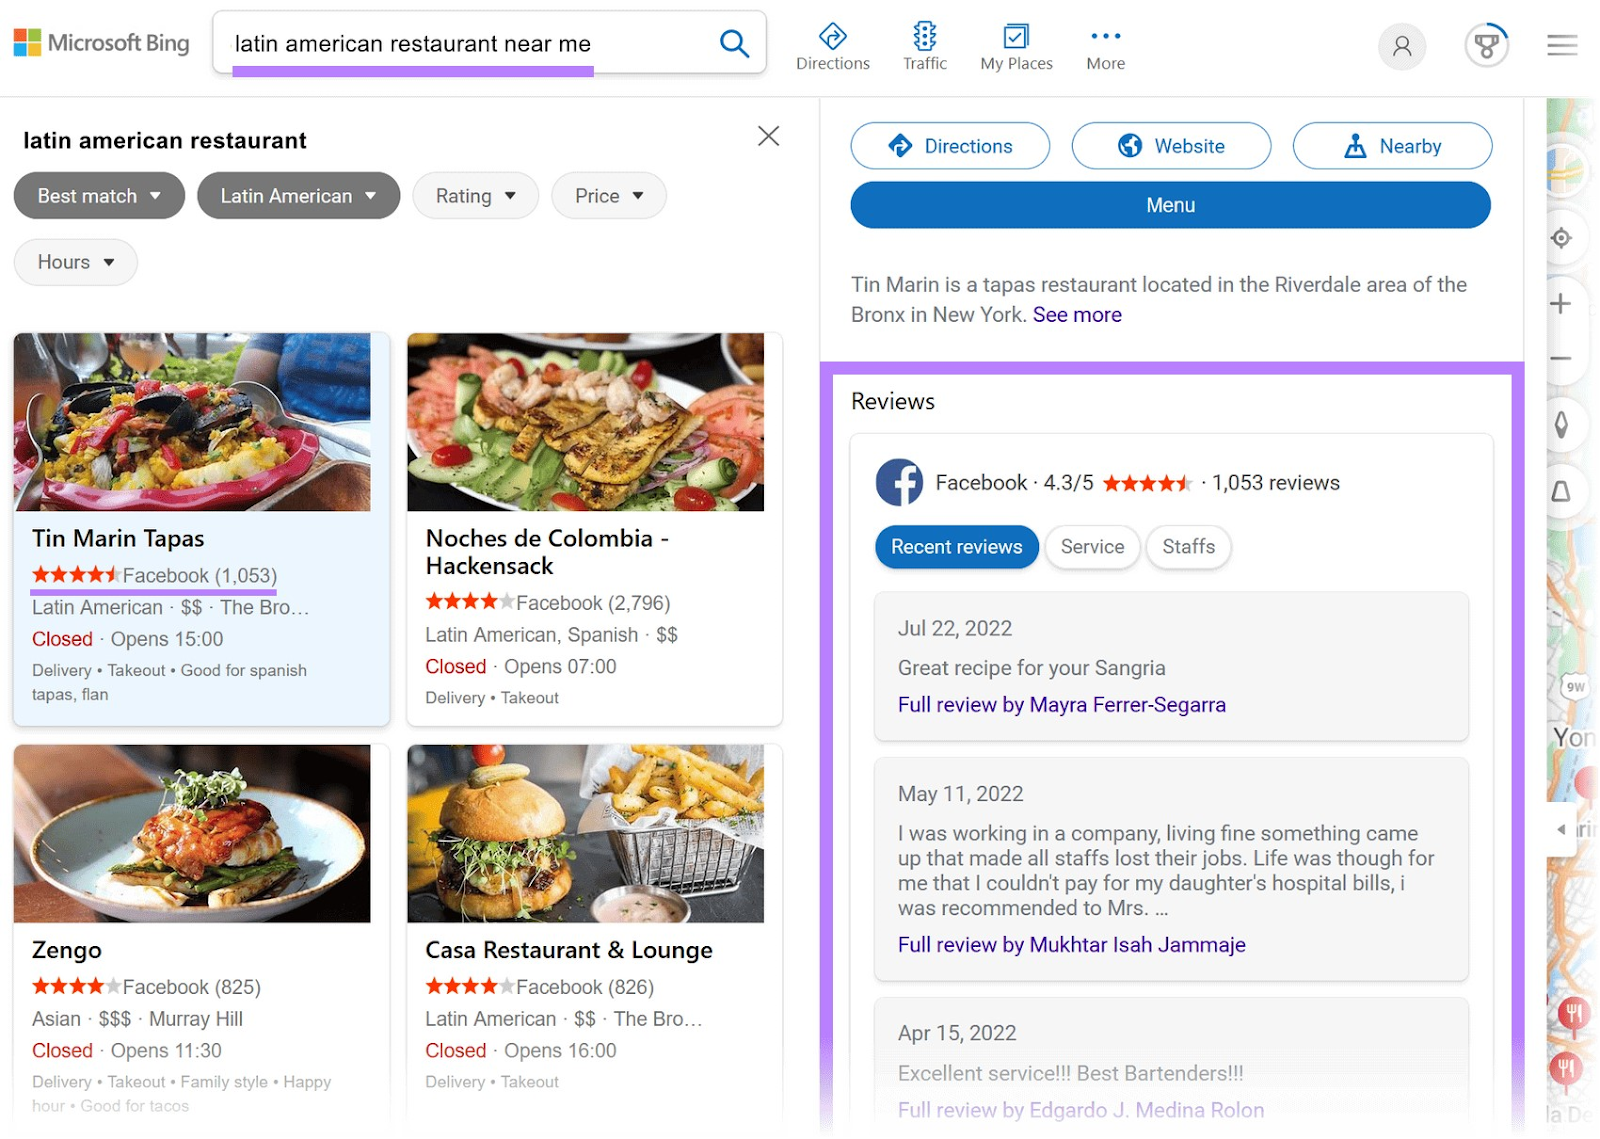 Facebook reviews appearing on Bing for "latin american restaurant near me" search